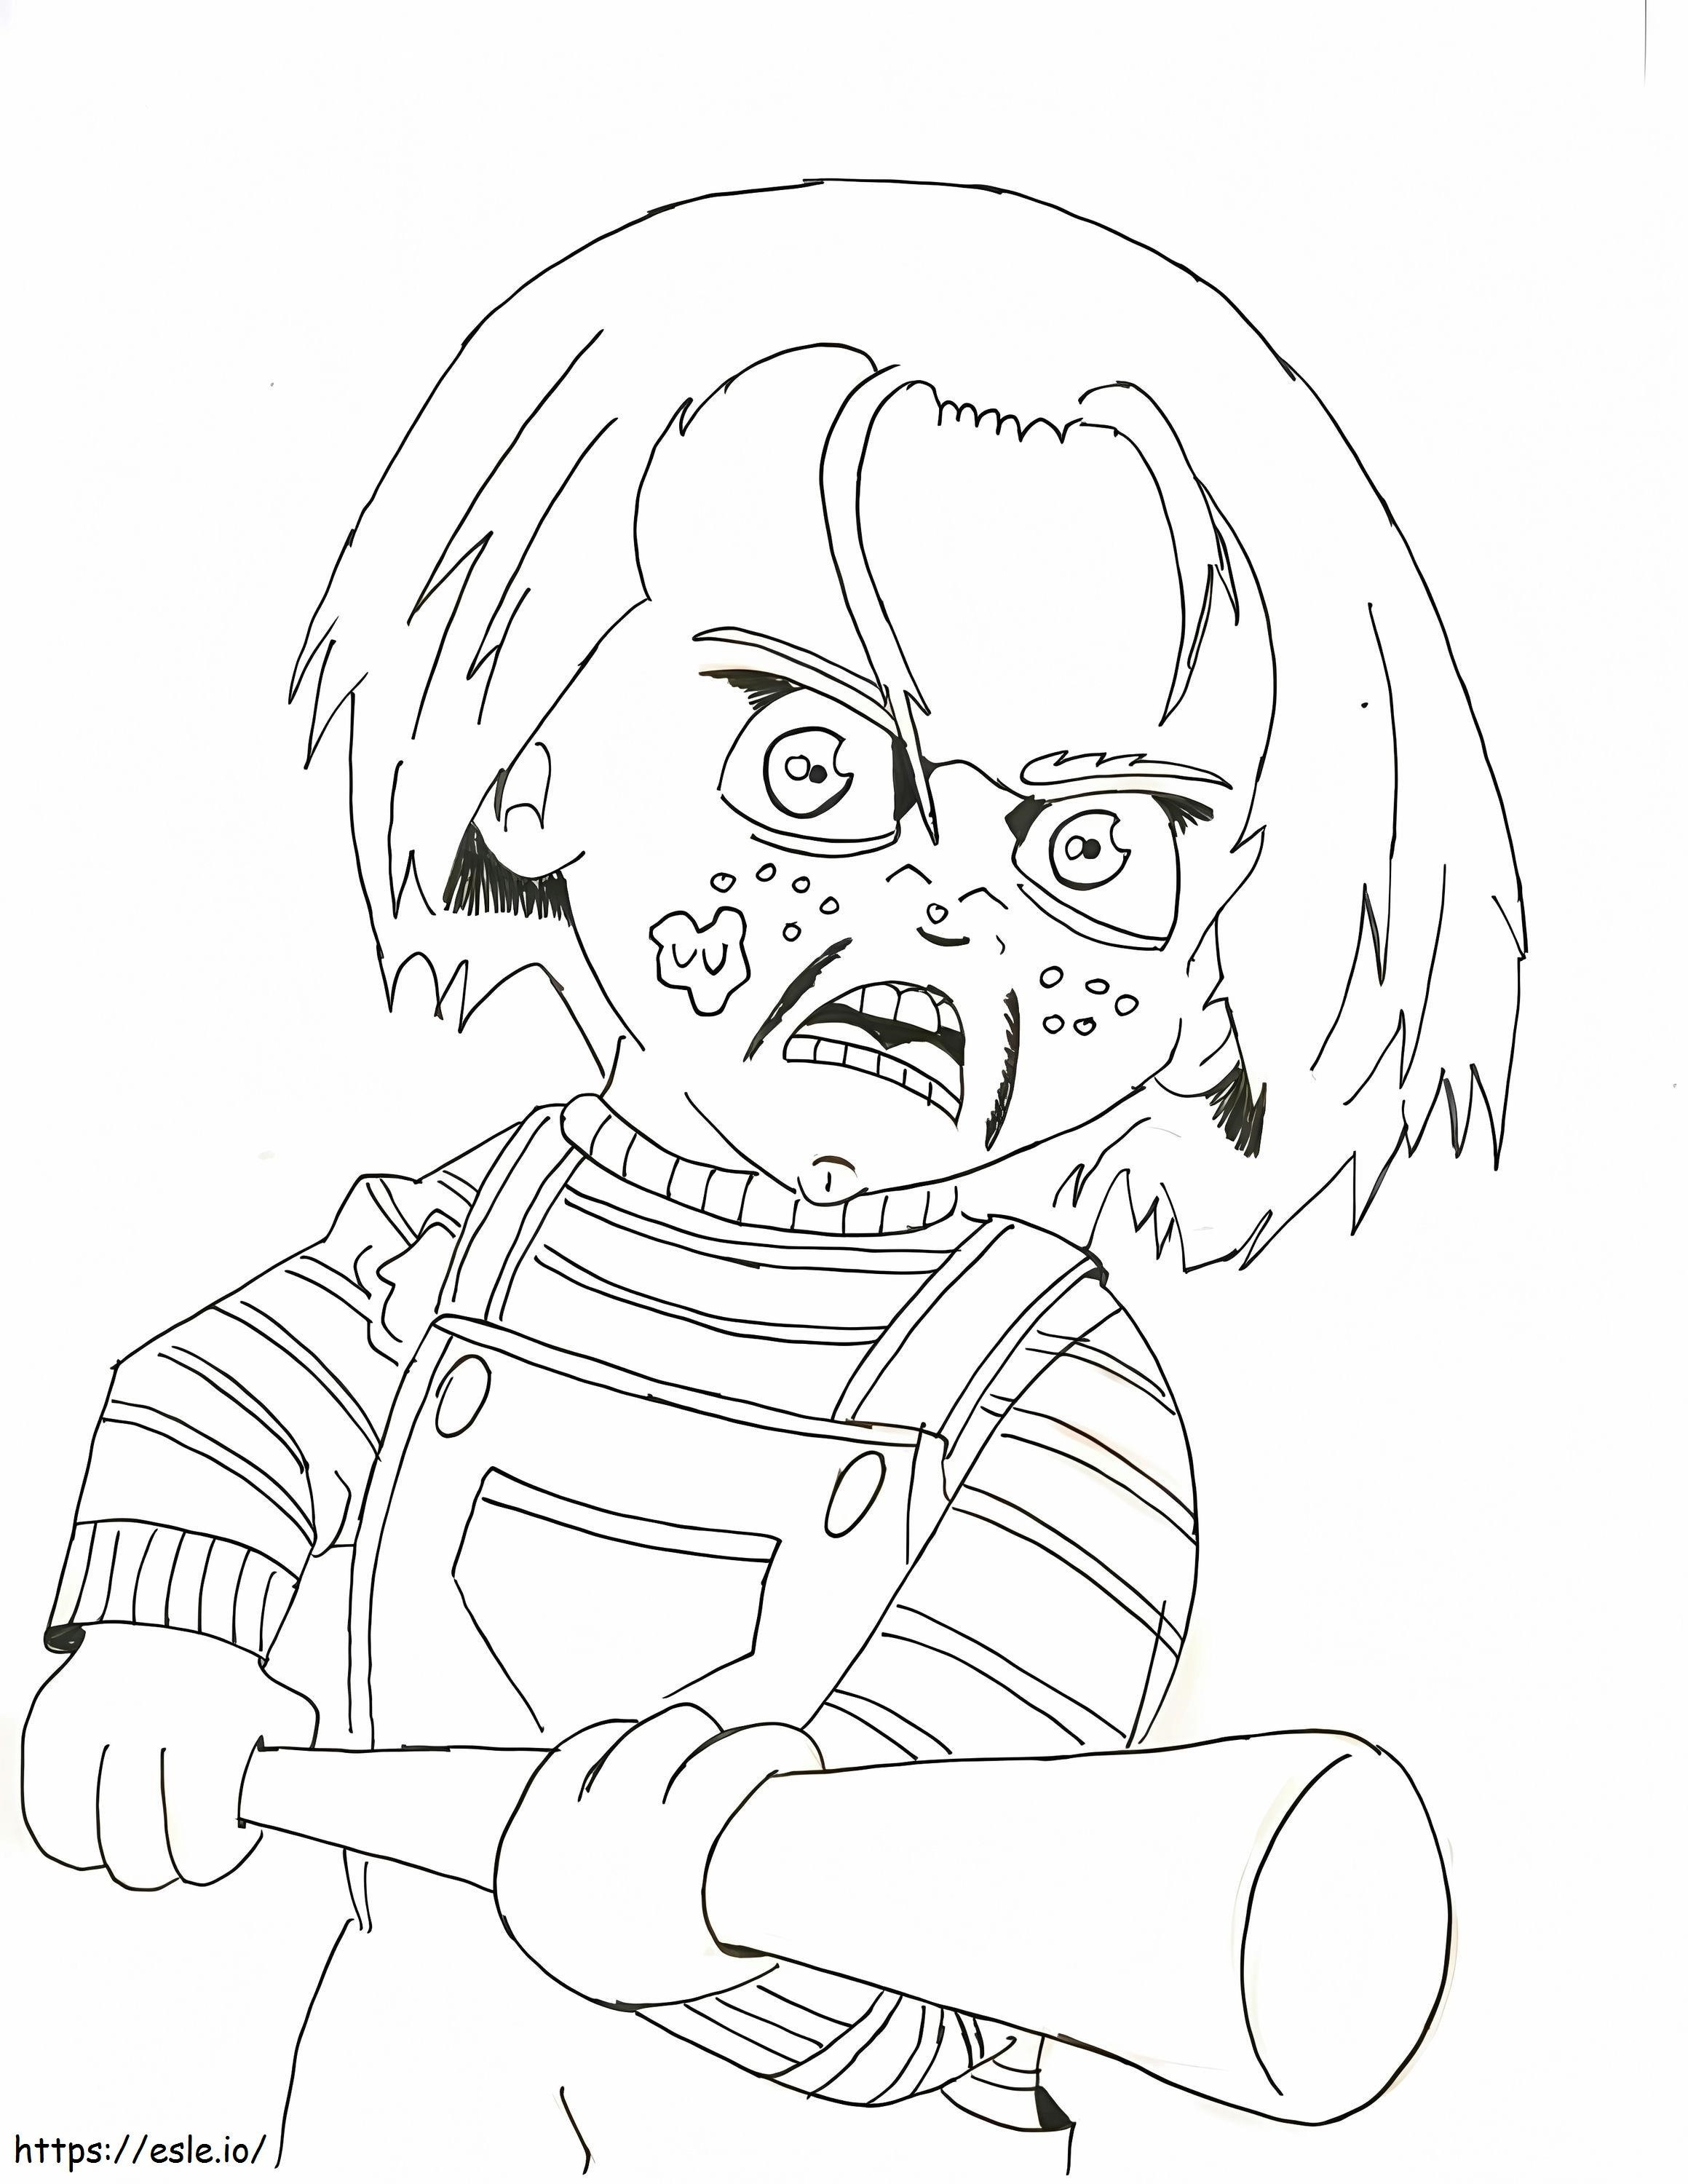 Angry Chucky coloring page